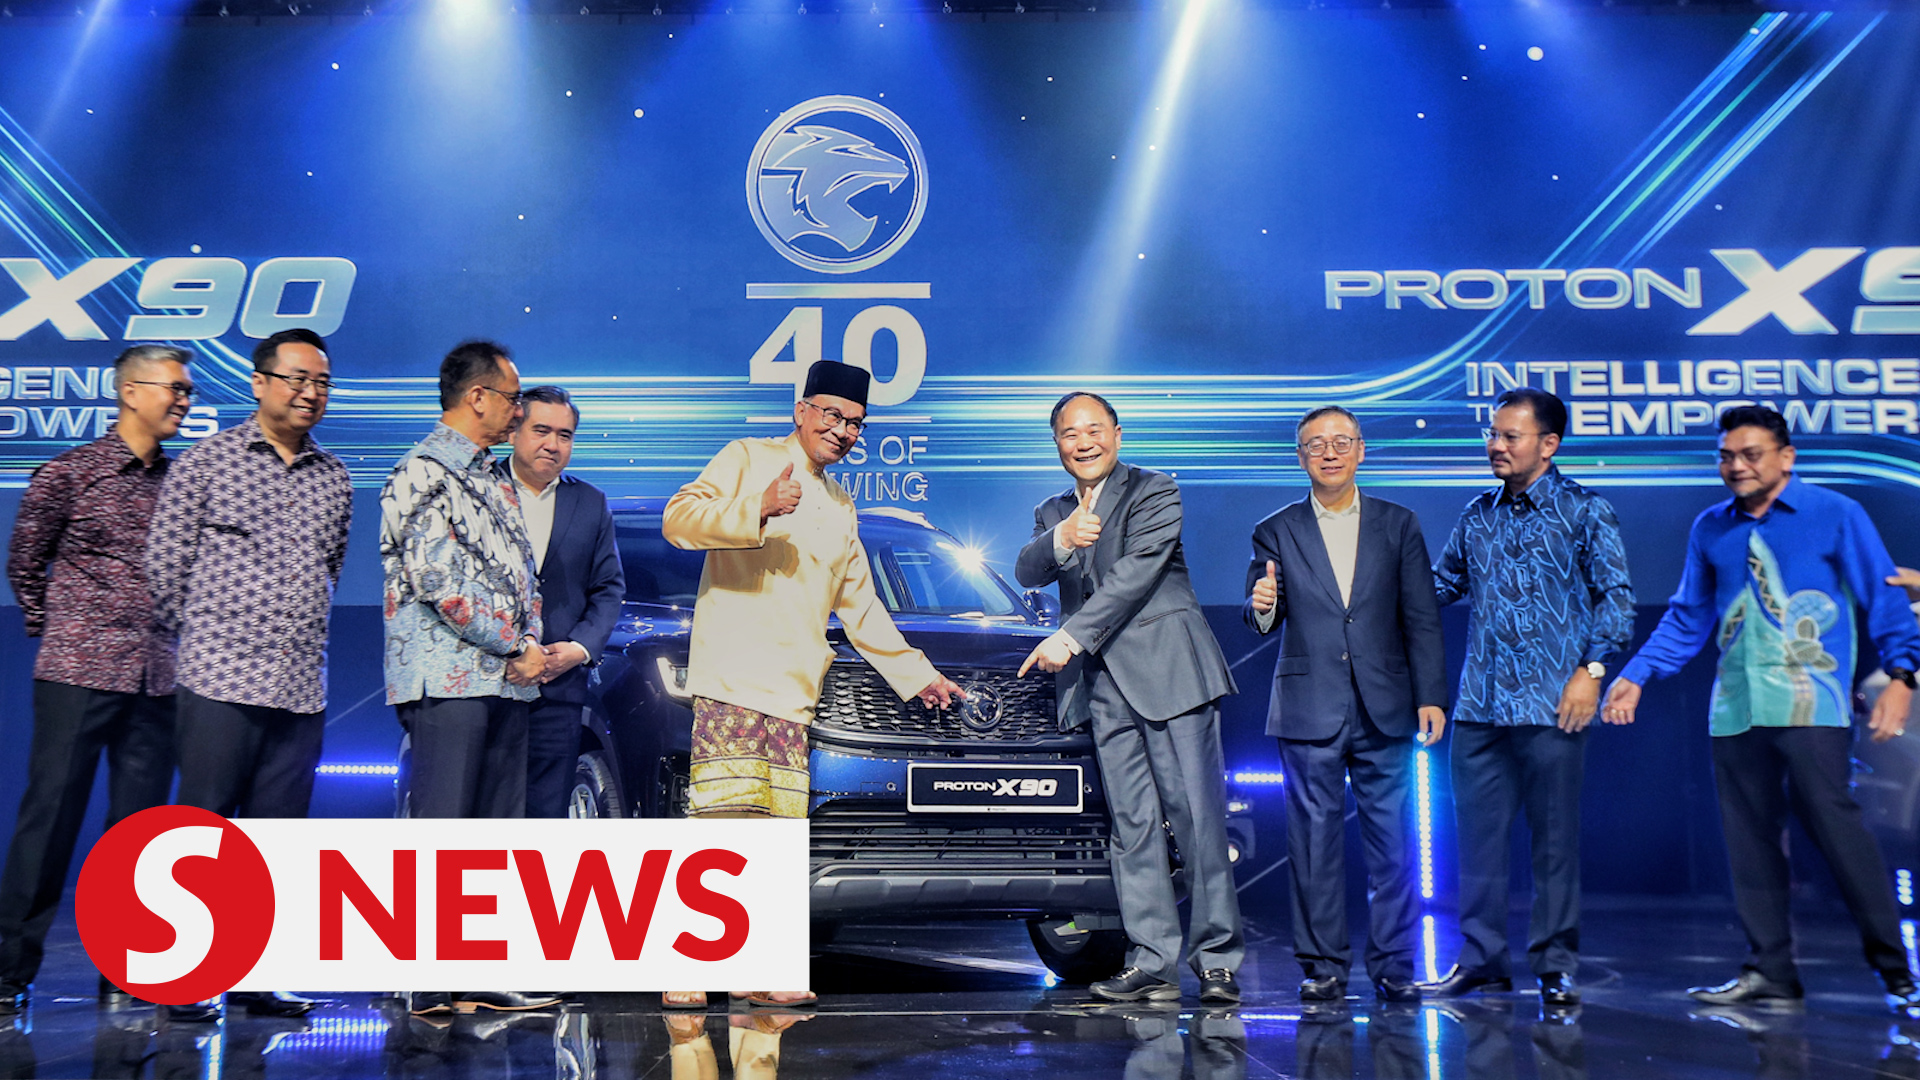 Proton X90 launched